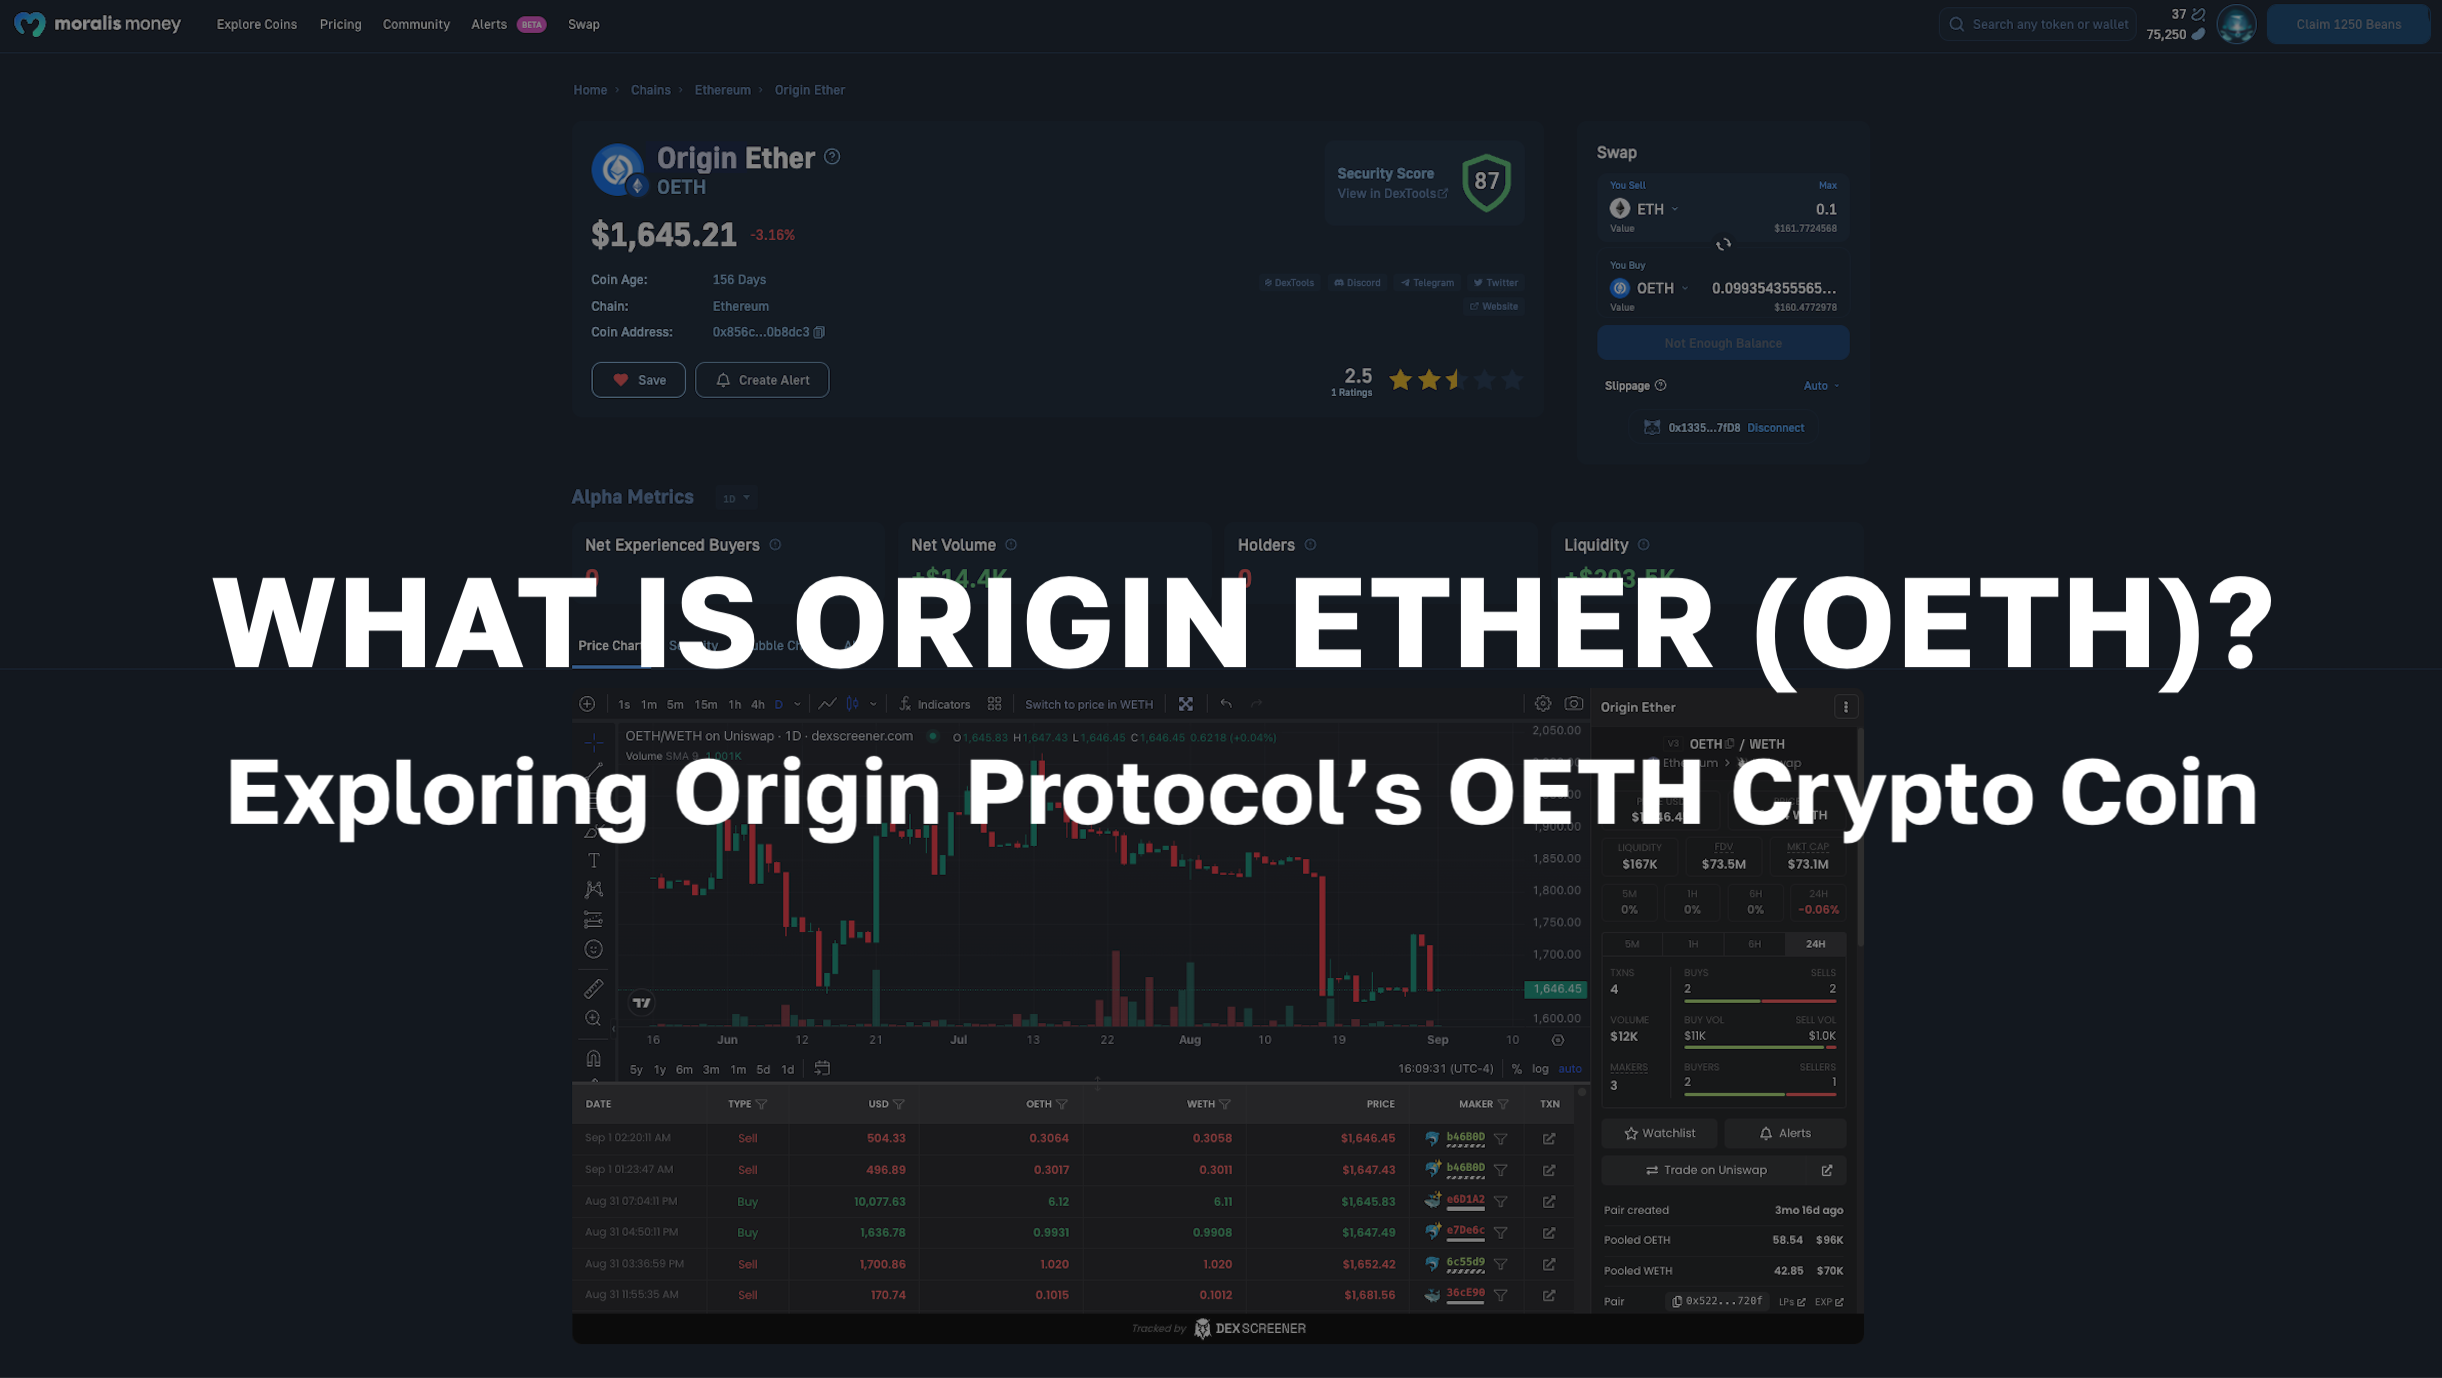 What is Origin Ether? Exploring Origin Protocol's OETH Crypto Coin